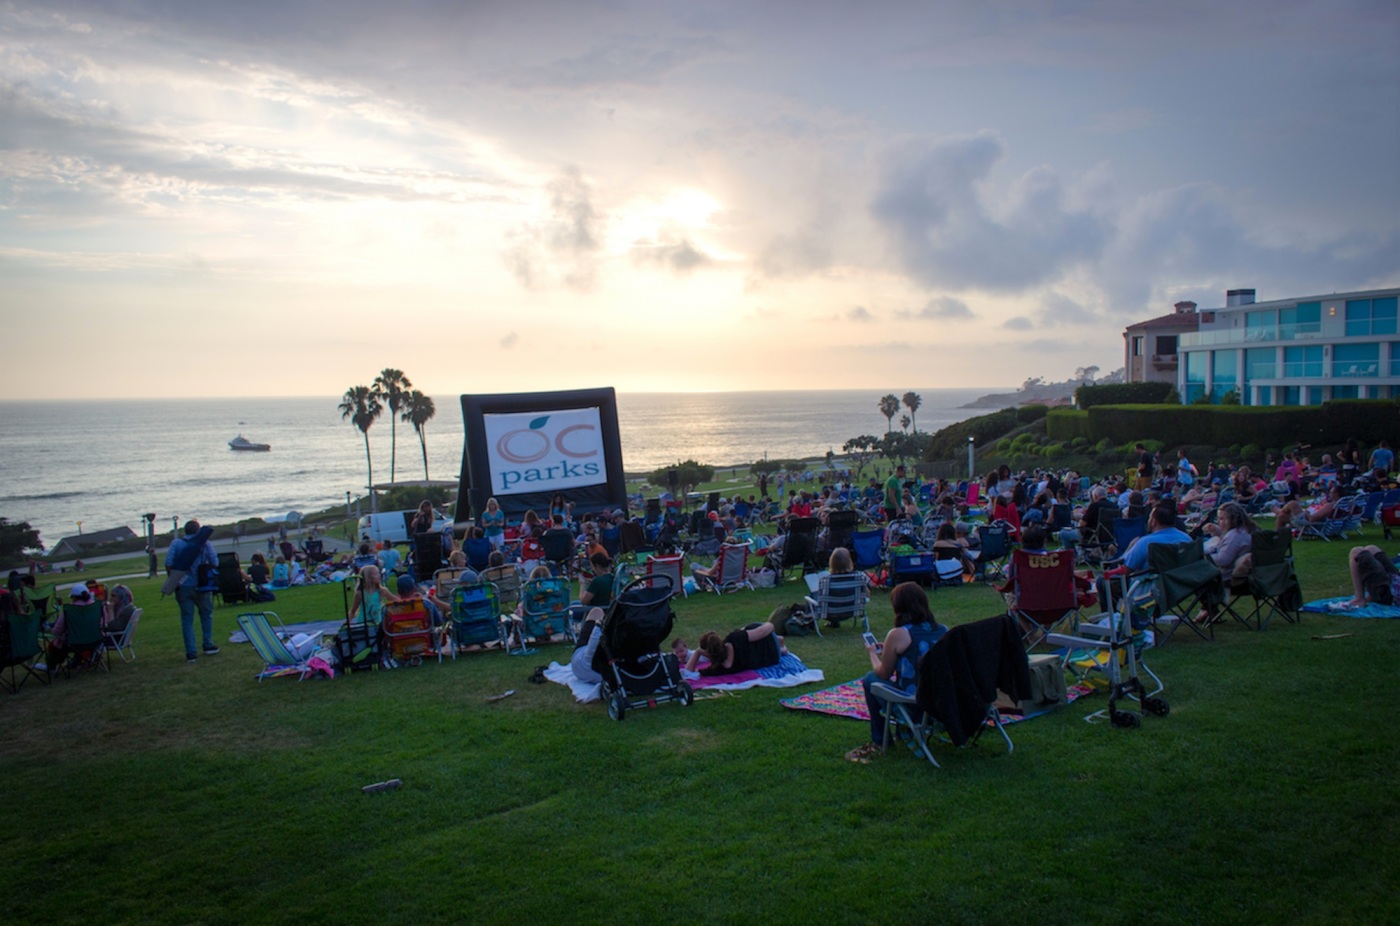 OC Parks announces details for free and familyfriendly Sunset Cinema